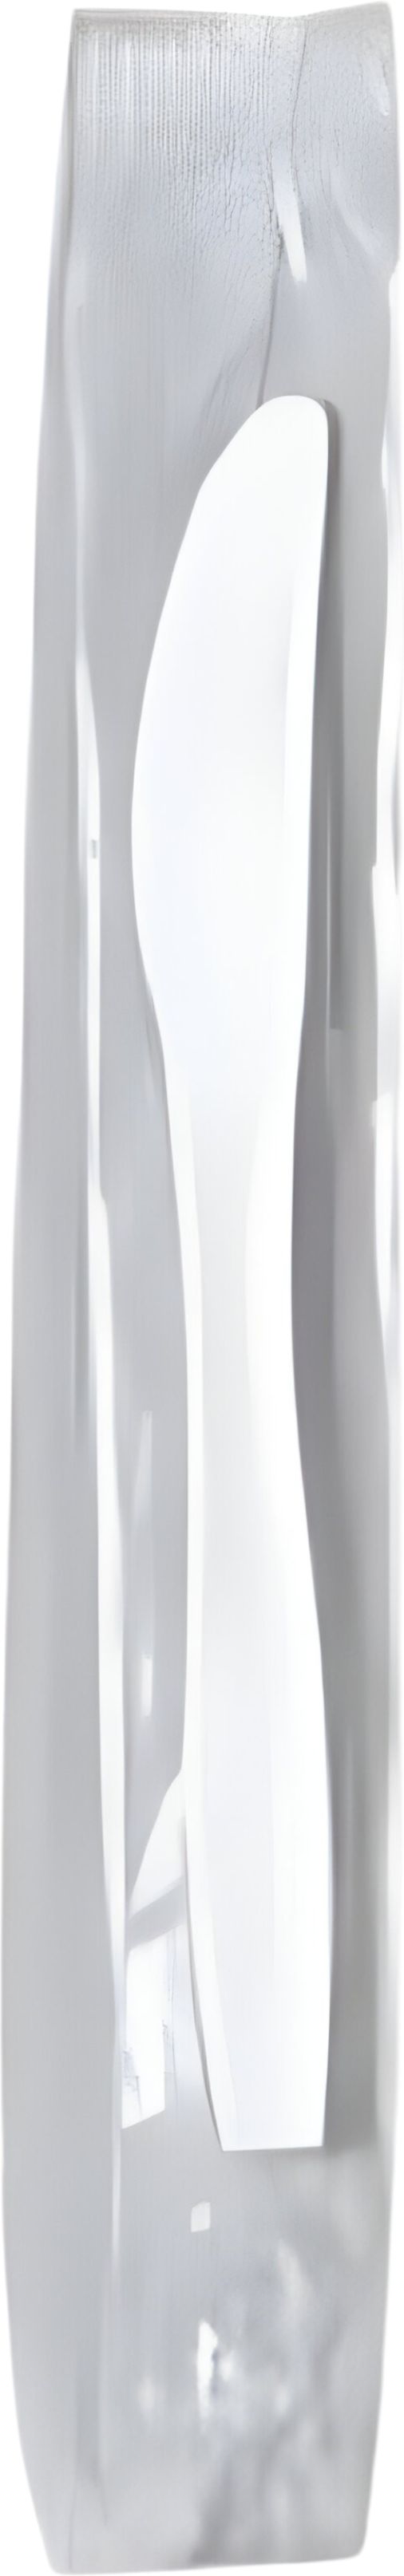 Dart Container - Regal White Medium Weight Individually Wrapped Cutlery Knife, 1000/Cs - MOW2